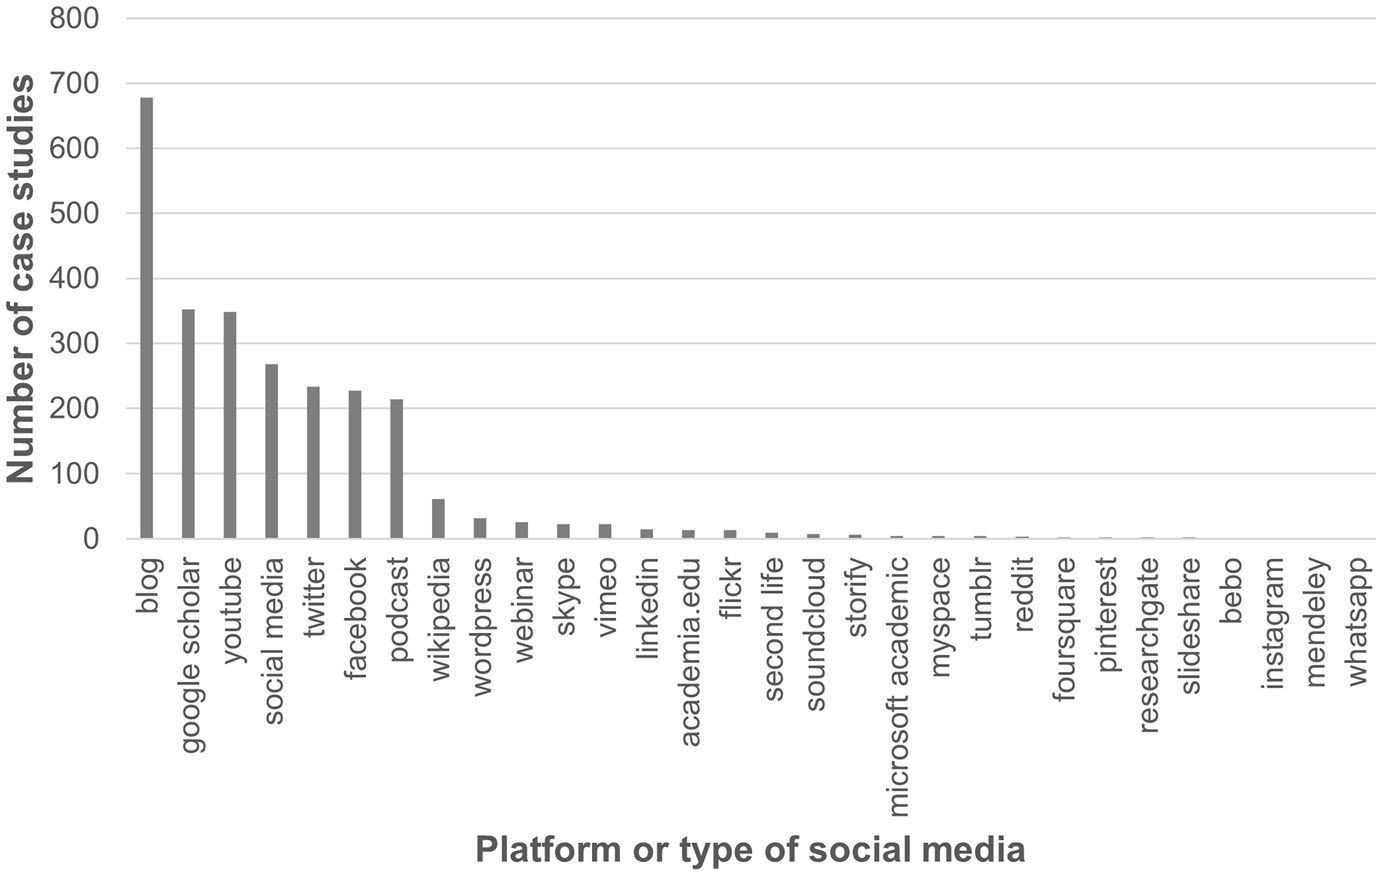 Bar chart showing the frequencies of case studies returned from the REF database in response to a range of social media platform search terms, arranged in descending order of frequency